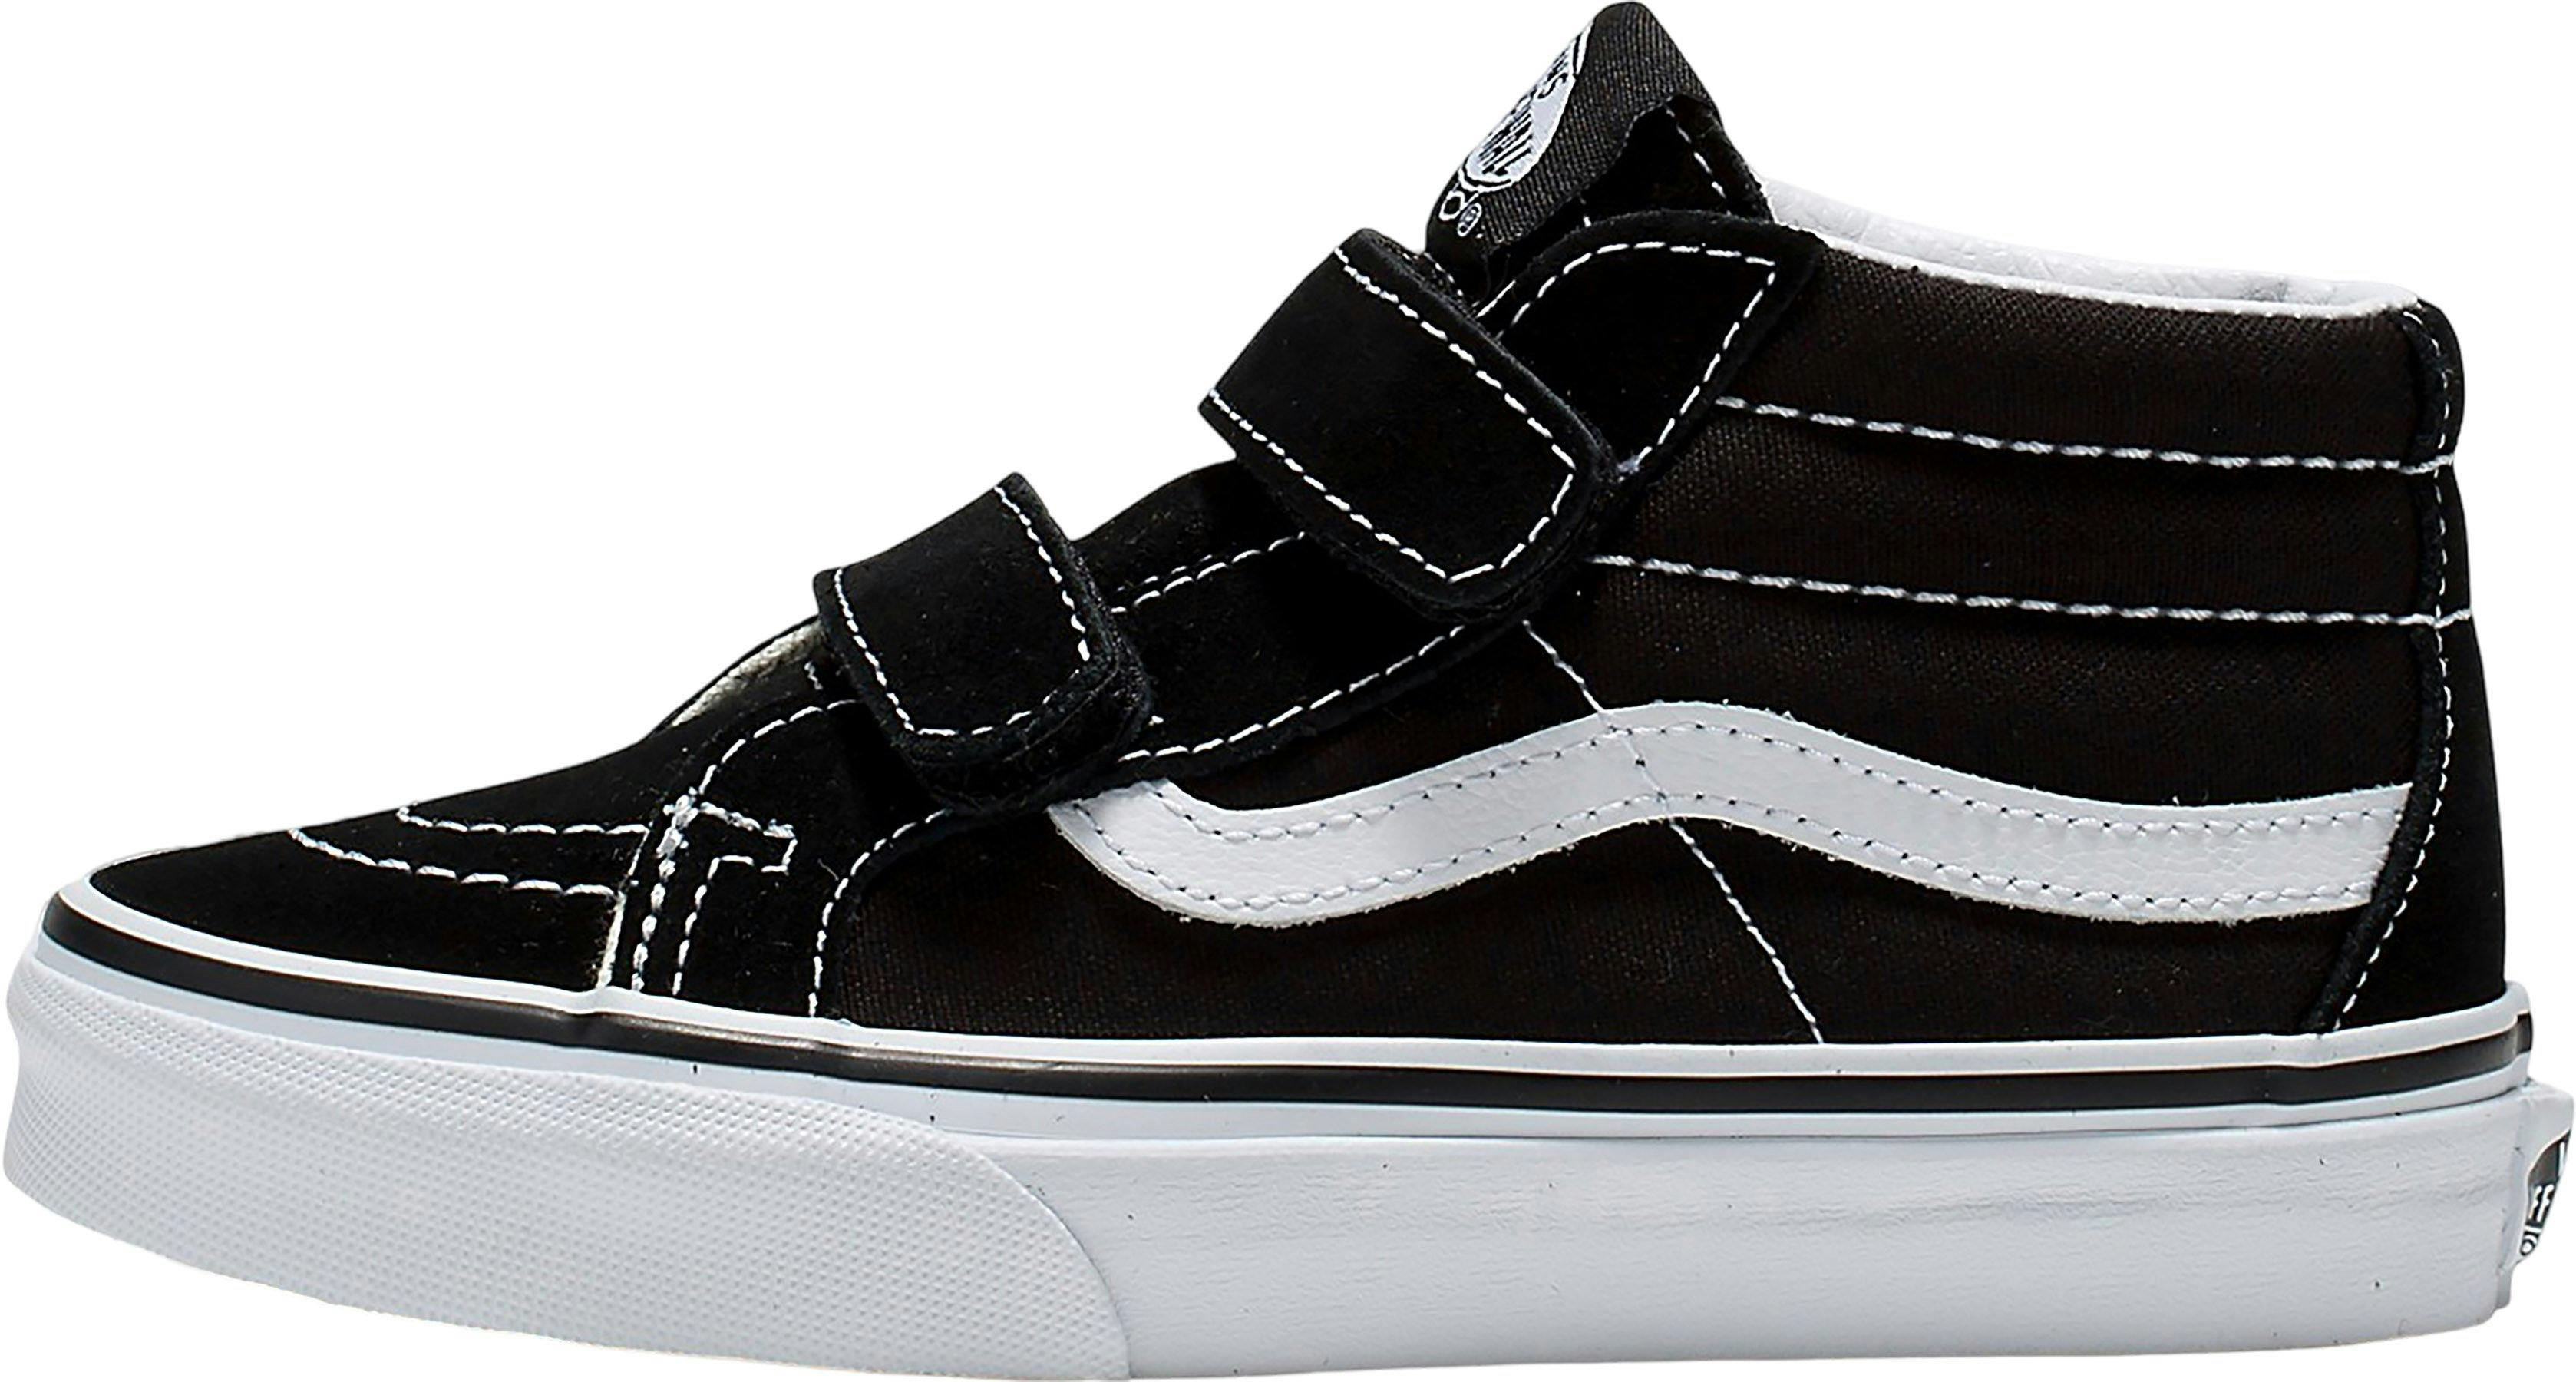 Product image for SK8-Mid Reissue V Shoes - Youth